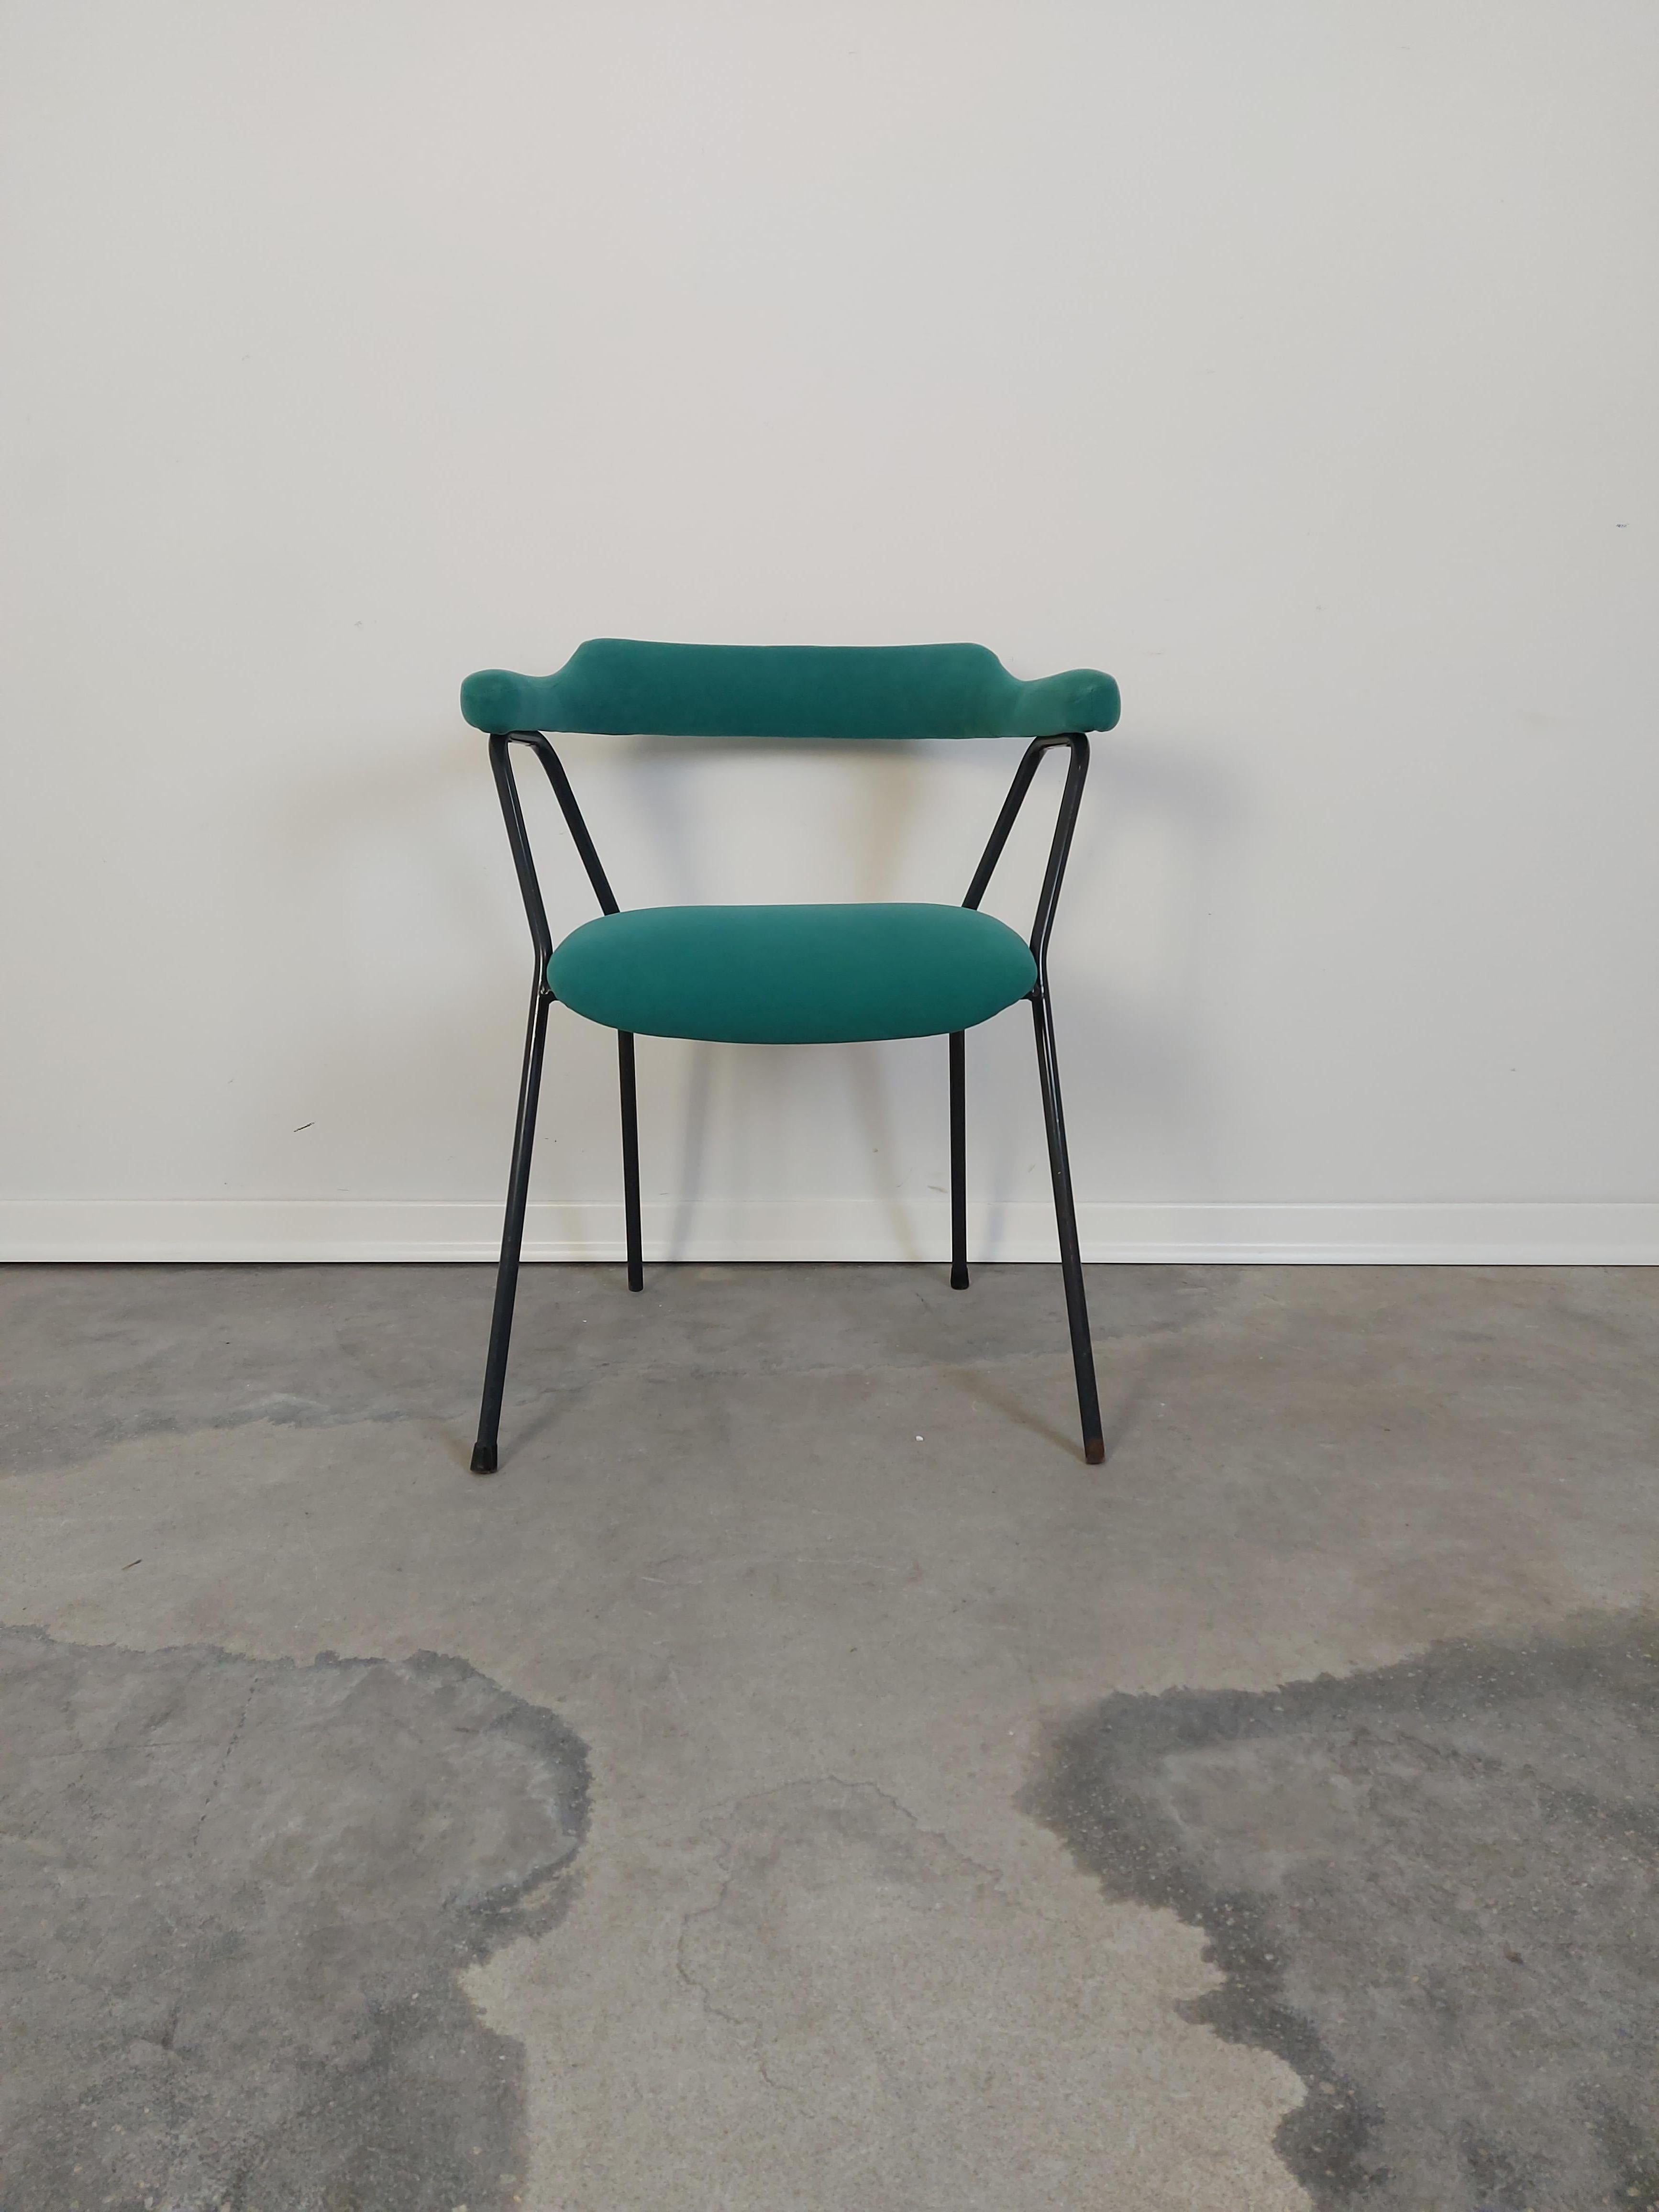 Armrest chair Model 4455 designed by Niko Kralj for Stol Kamnik in 50s. Some signs of use.

Pure minimalism finds its place in every interior. 

It multi folds and has curved back with black metal structure.

This chair was produced in the